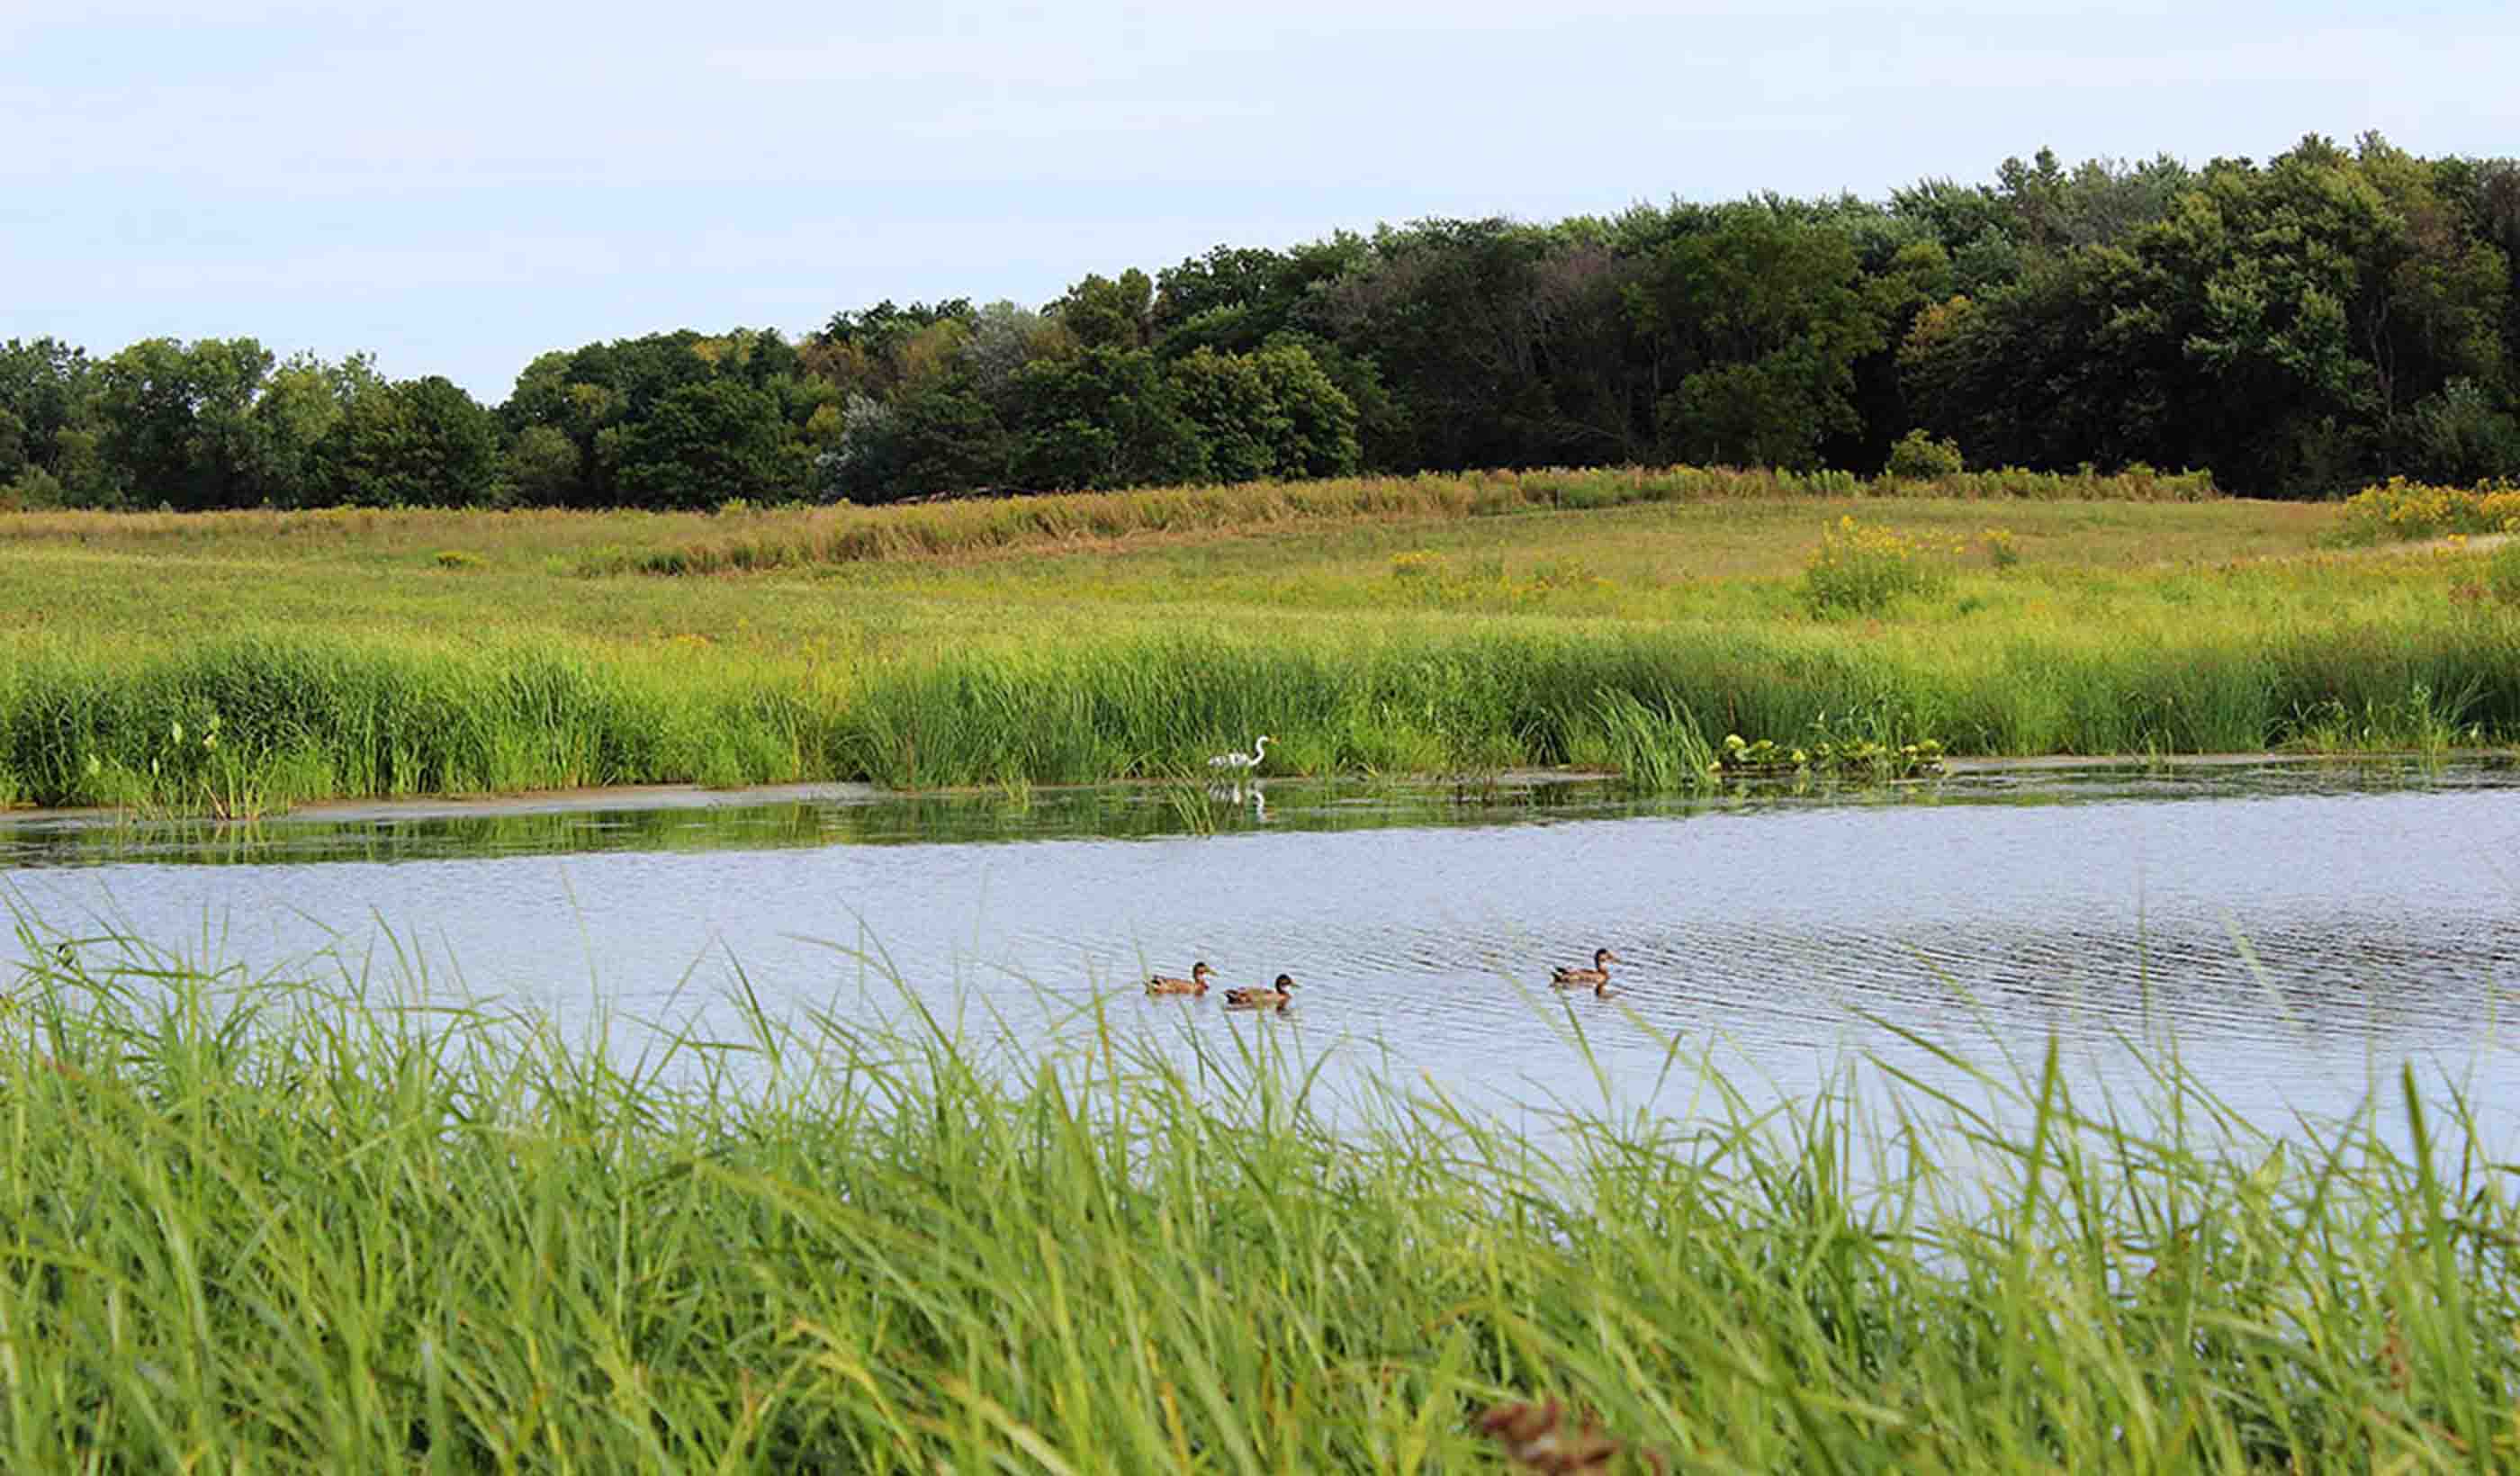 The 4 pillars of ecosystem restoration work together to create better communities